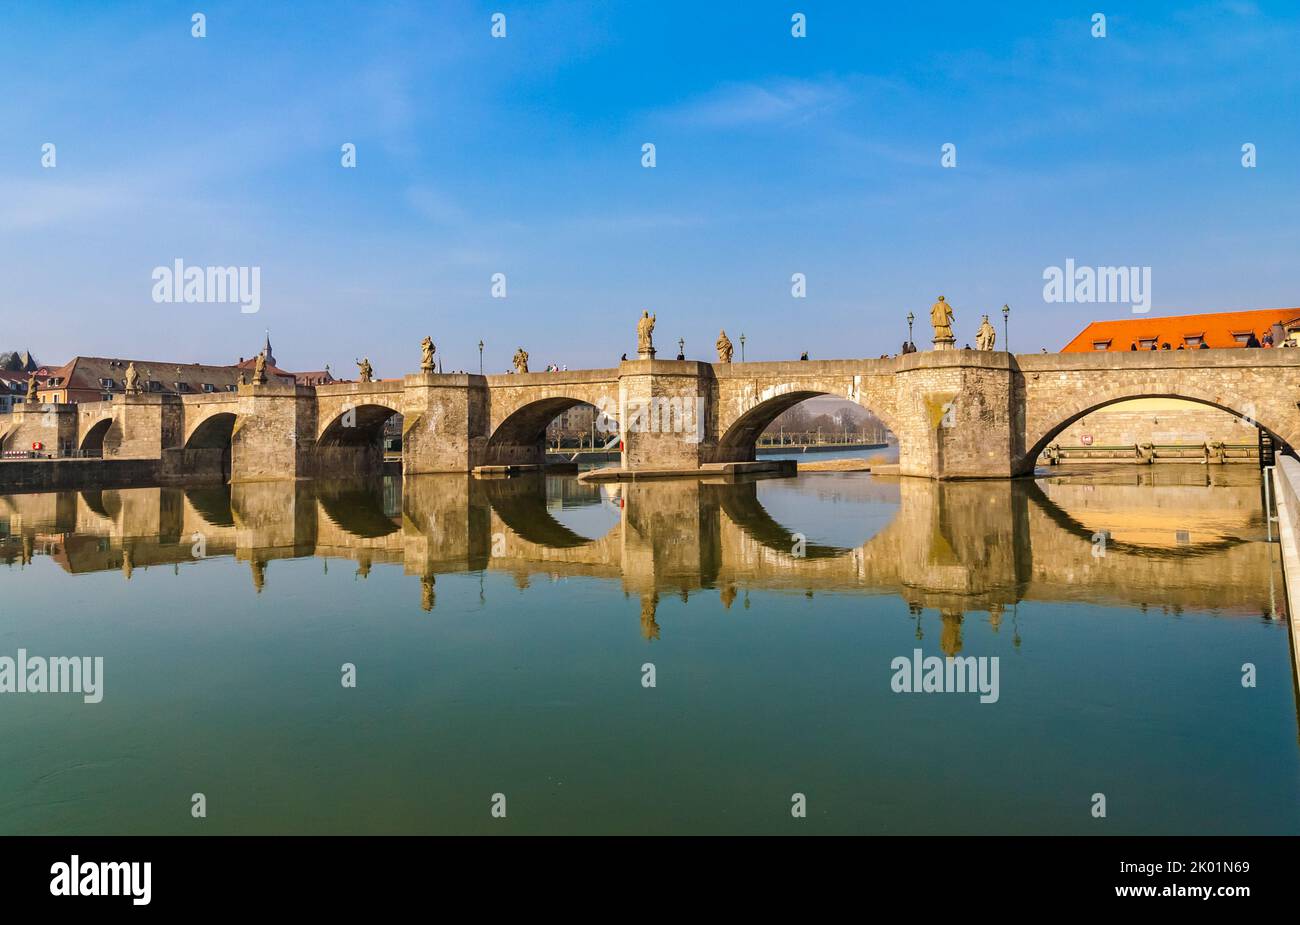 Beautiful view of the old bridge “Alte Mainbrücke” in Würzburg, Germany. The pedestrianized bridge over the Main river was erected from 1473 to 1543. Stock Photo